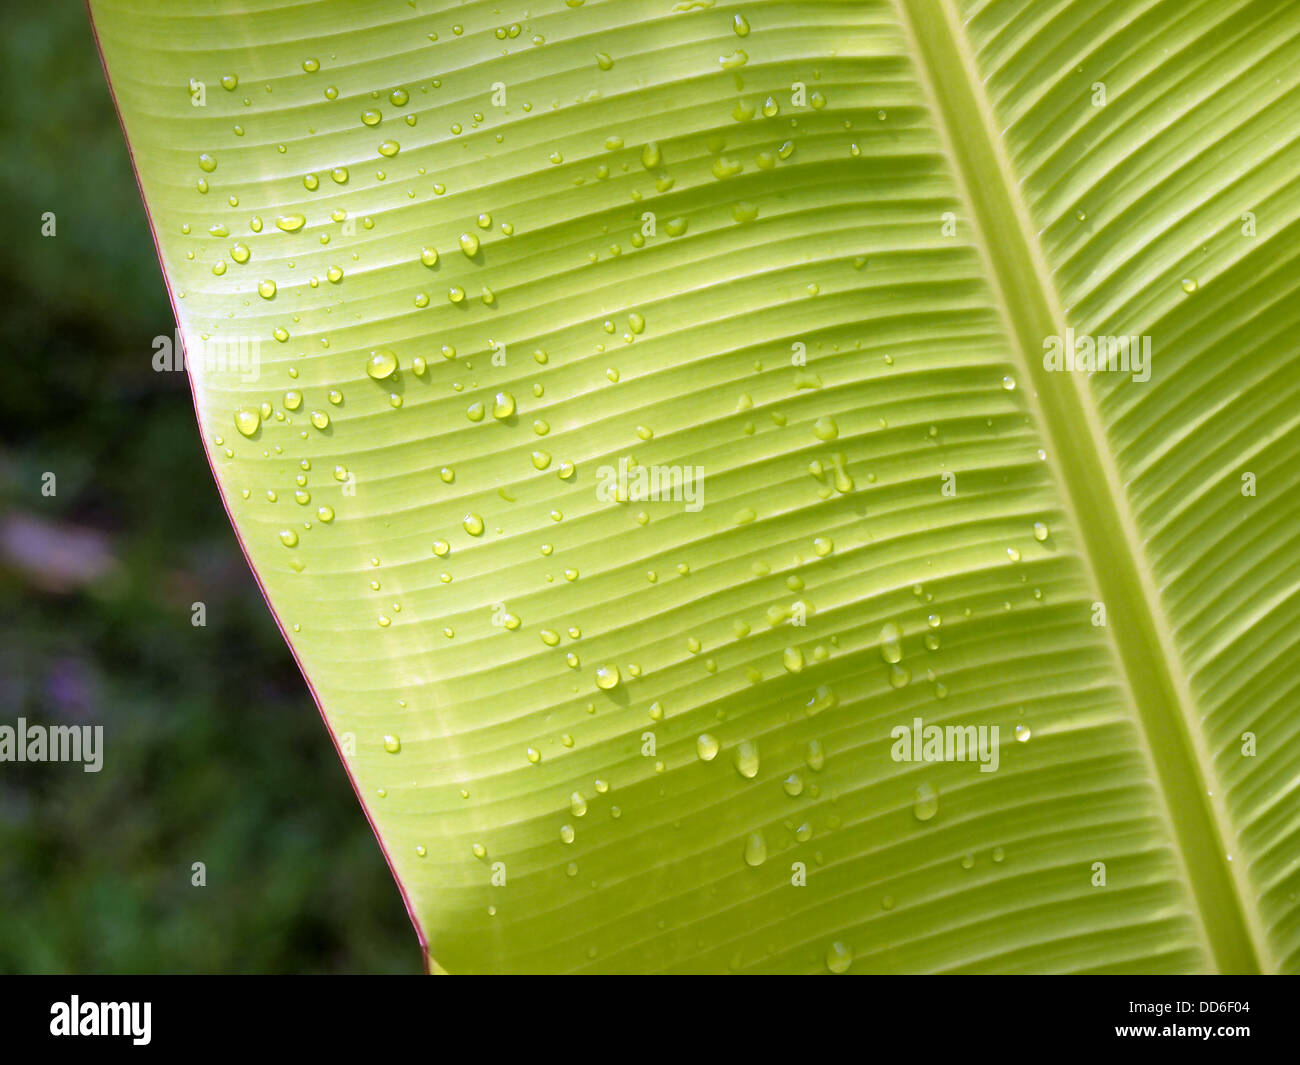 Close-up view of banana leaf with water droplets Stock Photo